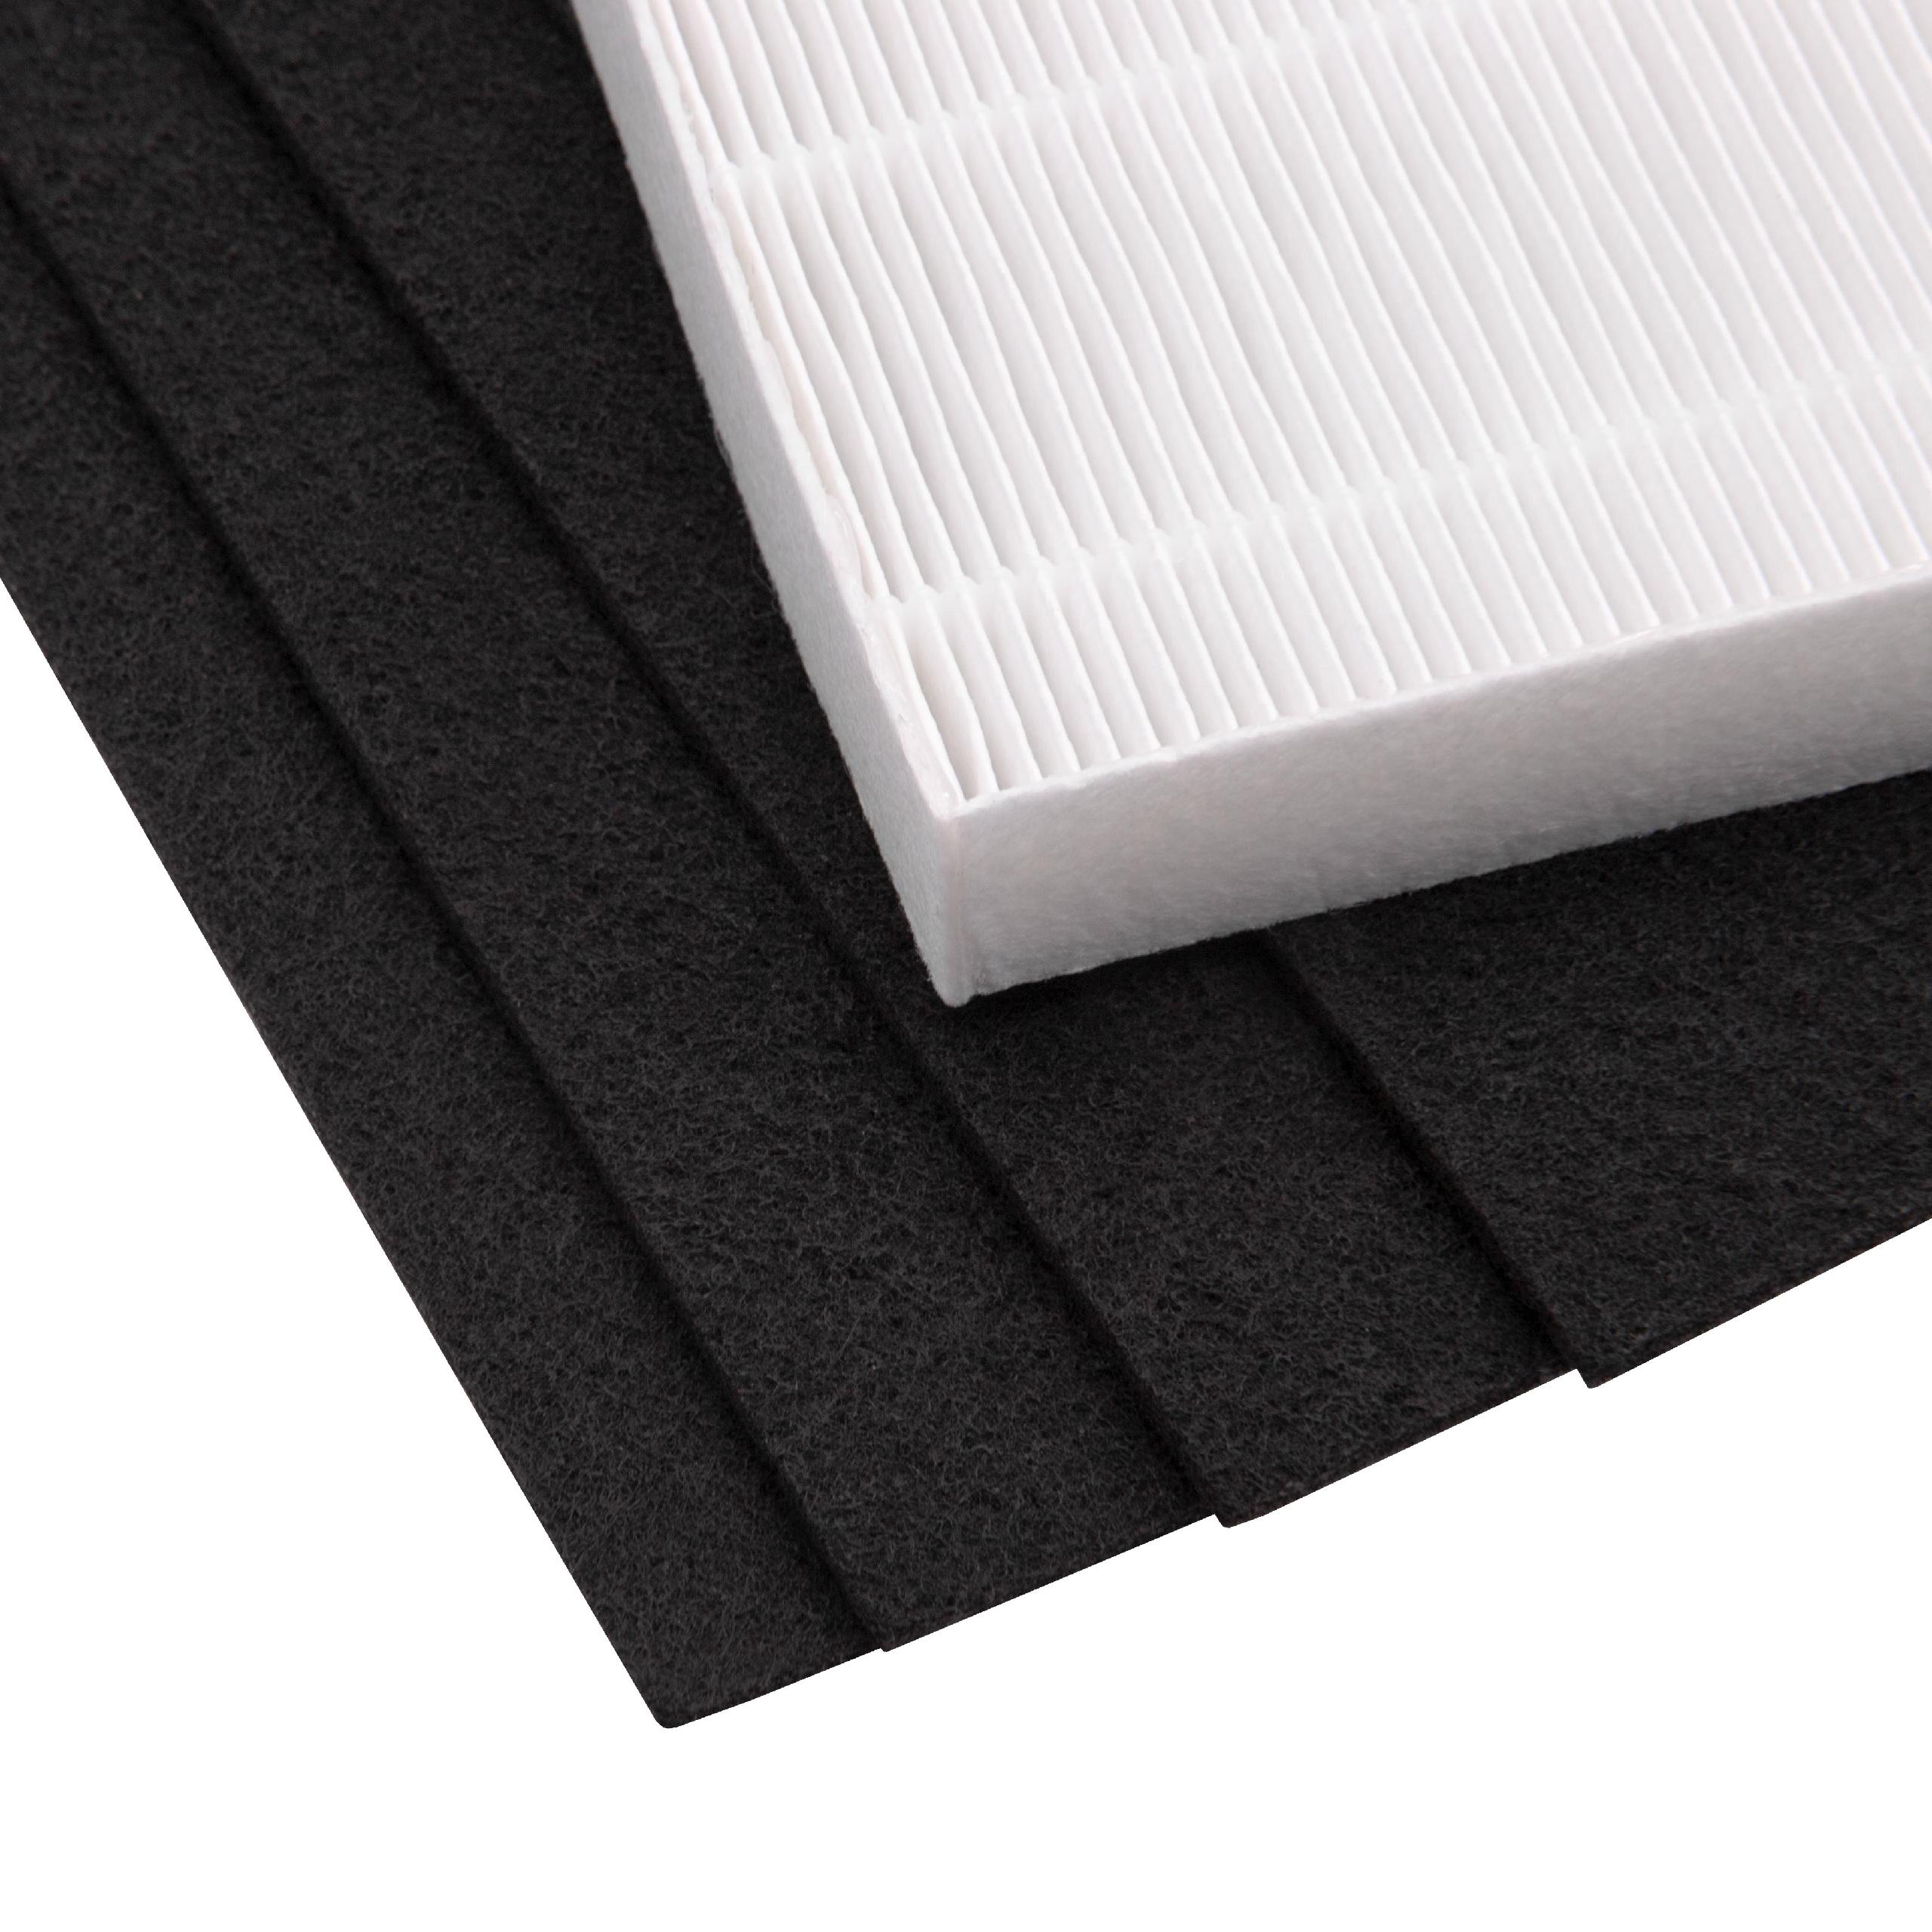 Filter Set replaces Winix WRF45HC for Air Purifier - HEPA filter, activated carbon filter